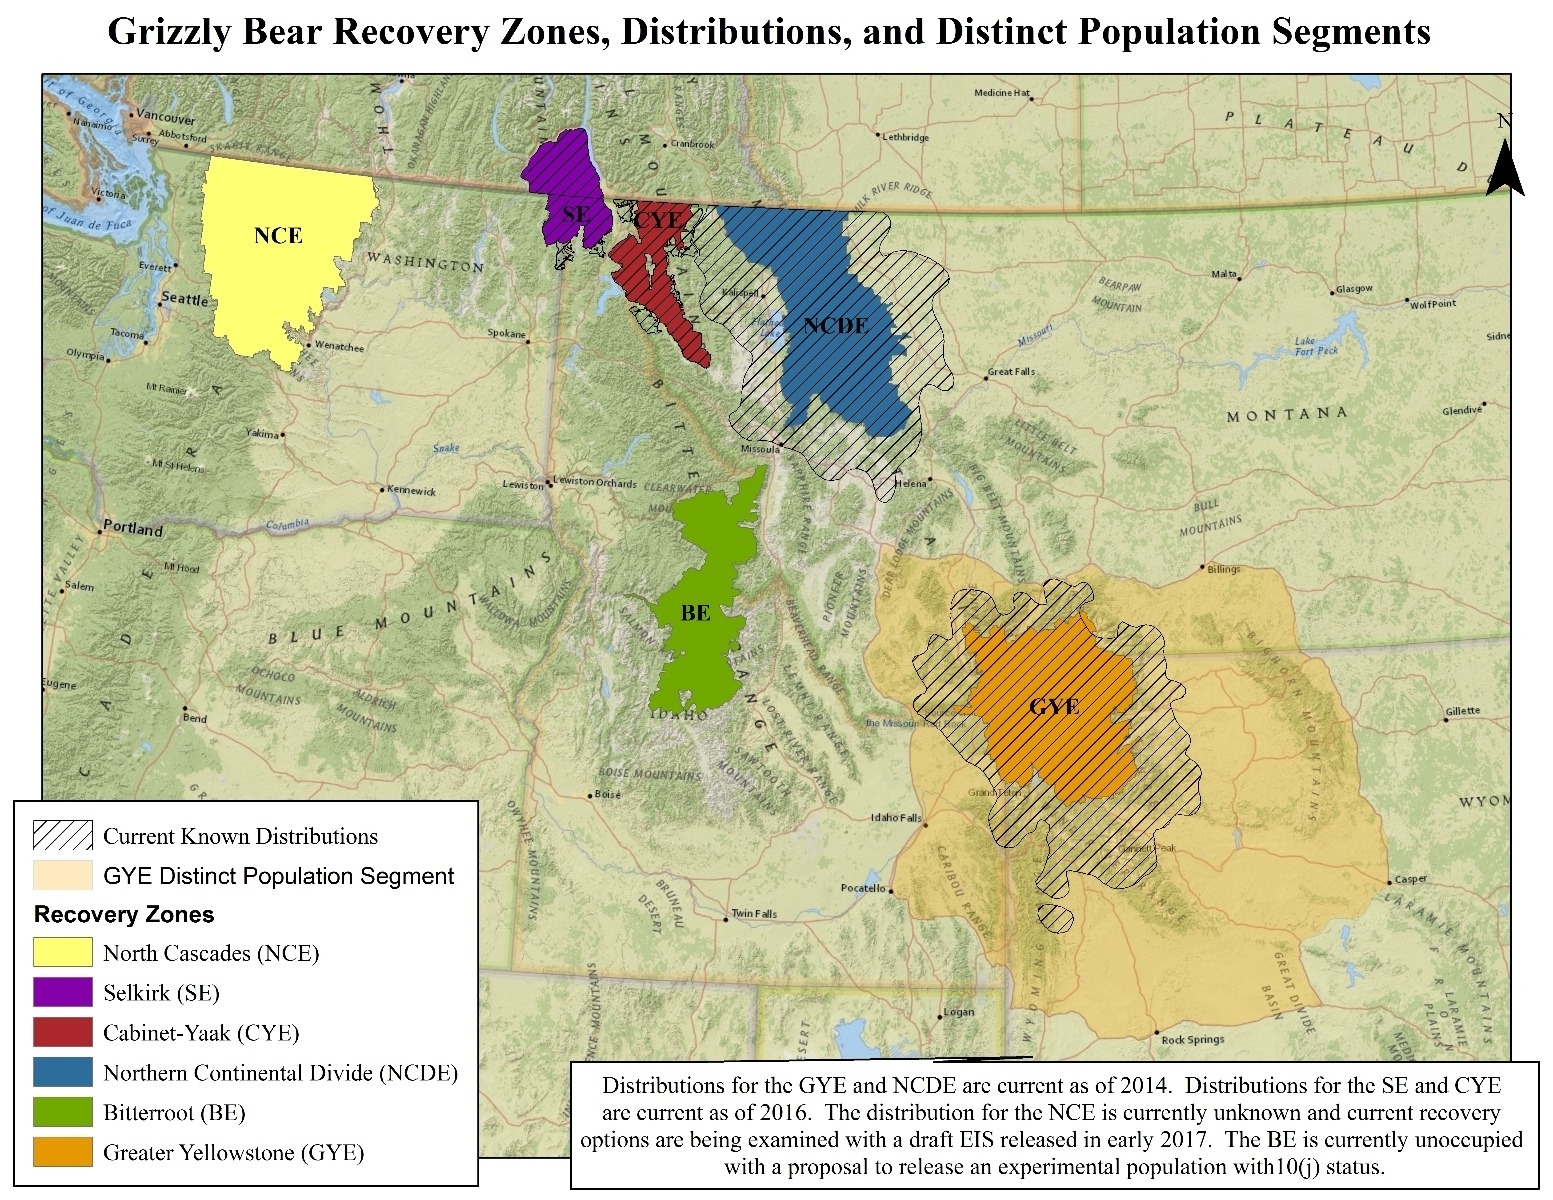 Map assembled by the U.S. Fish and Wildlife Service showing the different island populations of grizzly bears in the northern Rockies. 